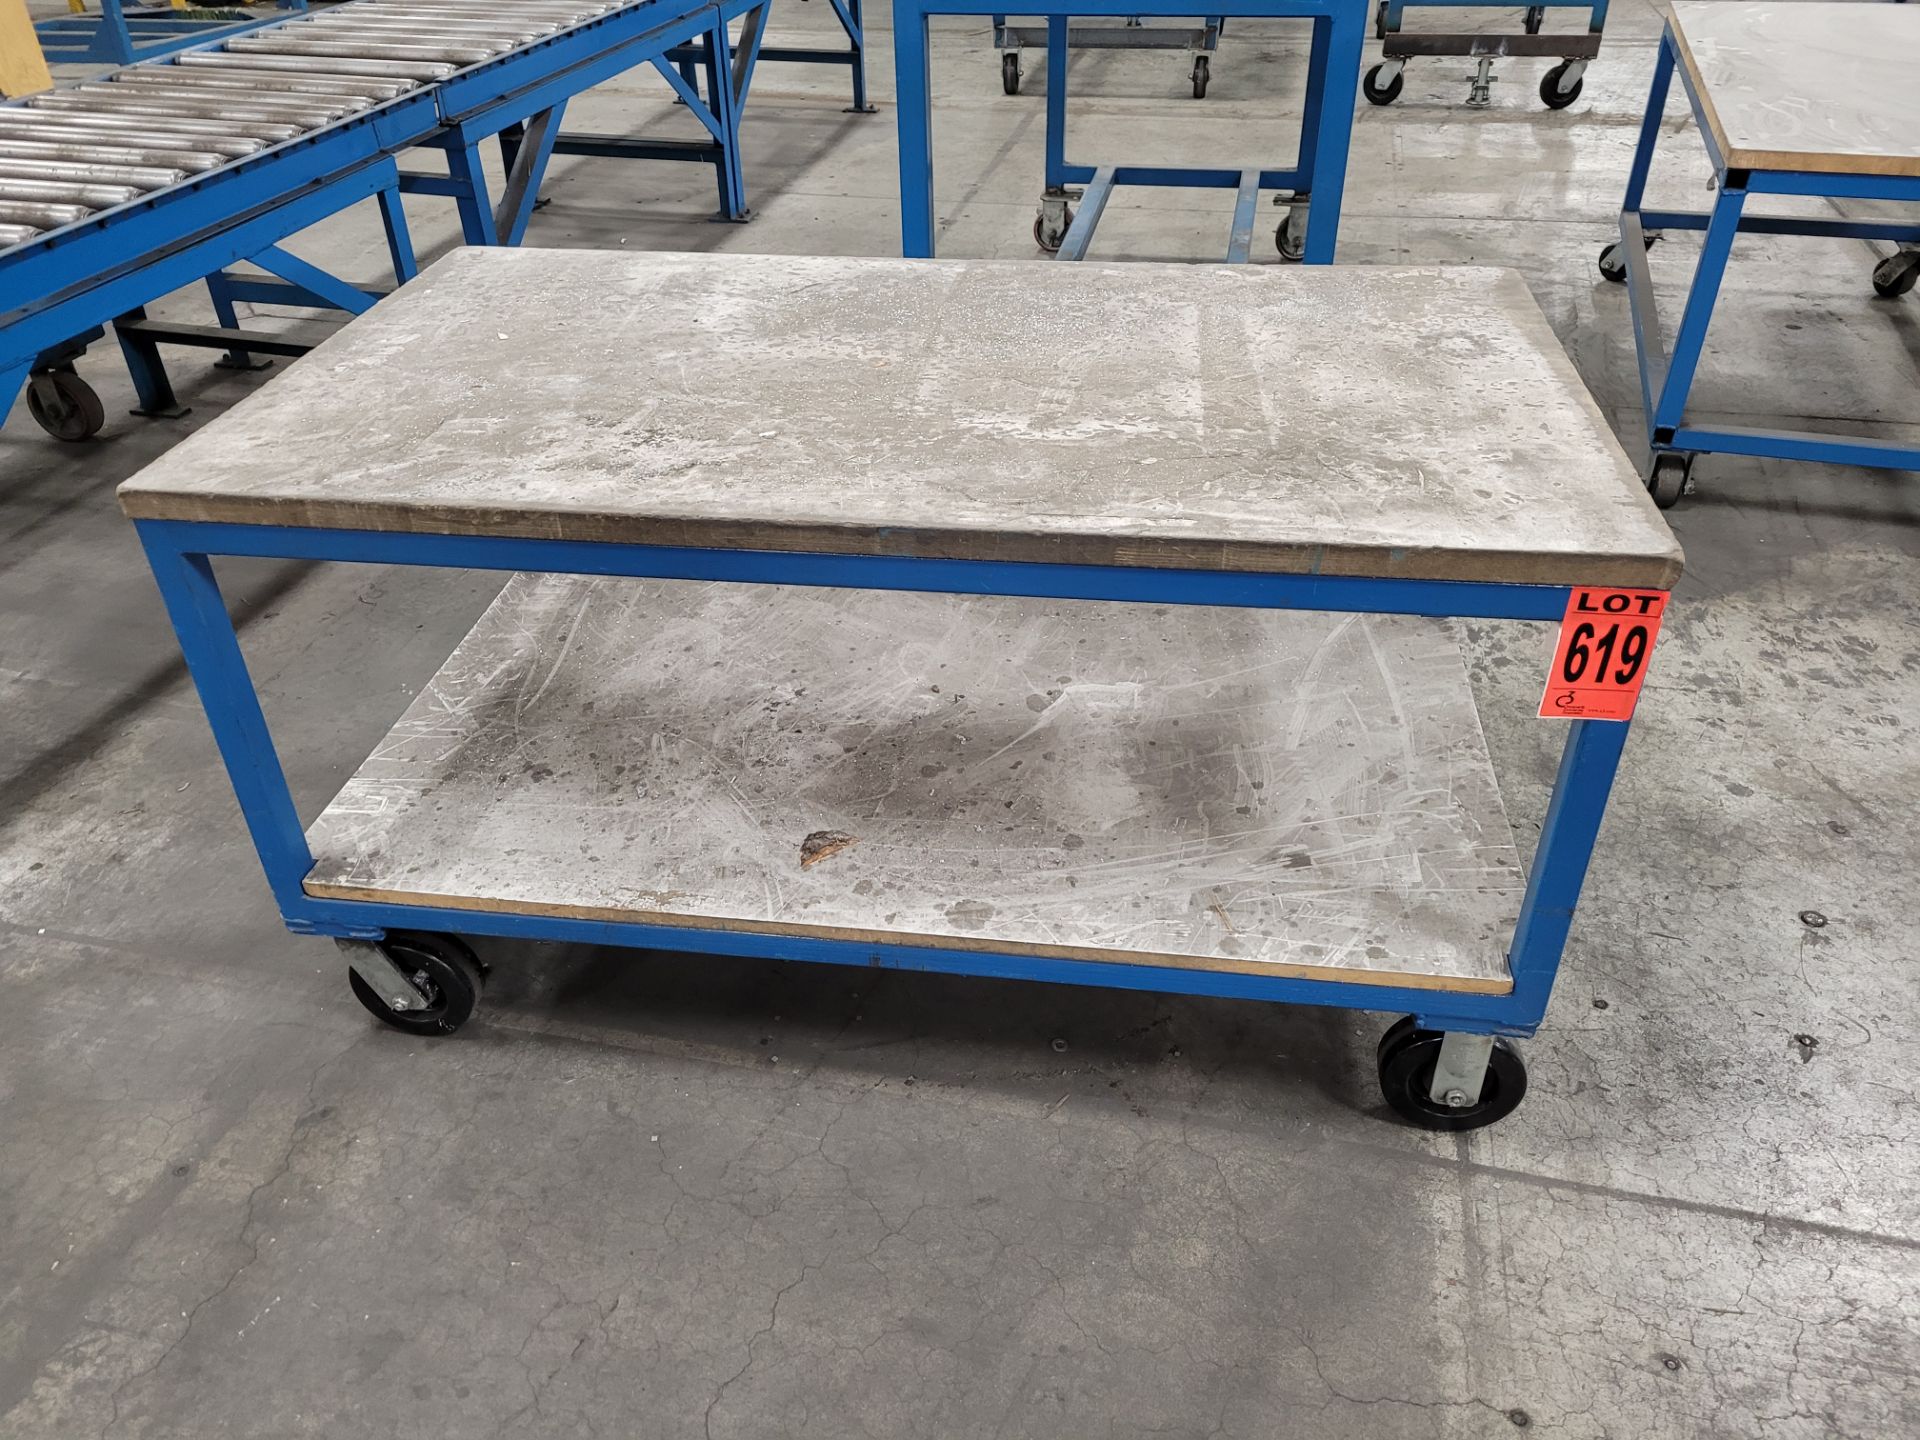 Mobile steel frame 2-level worktable on casters w/plywood surfaces